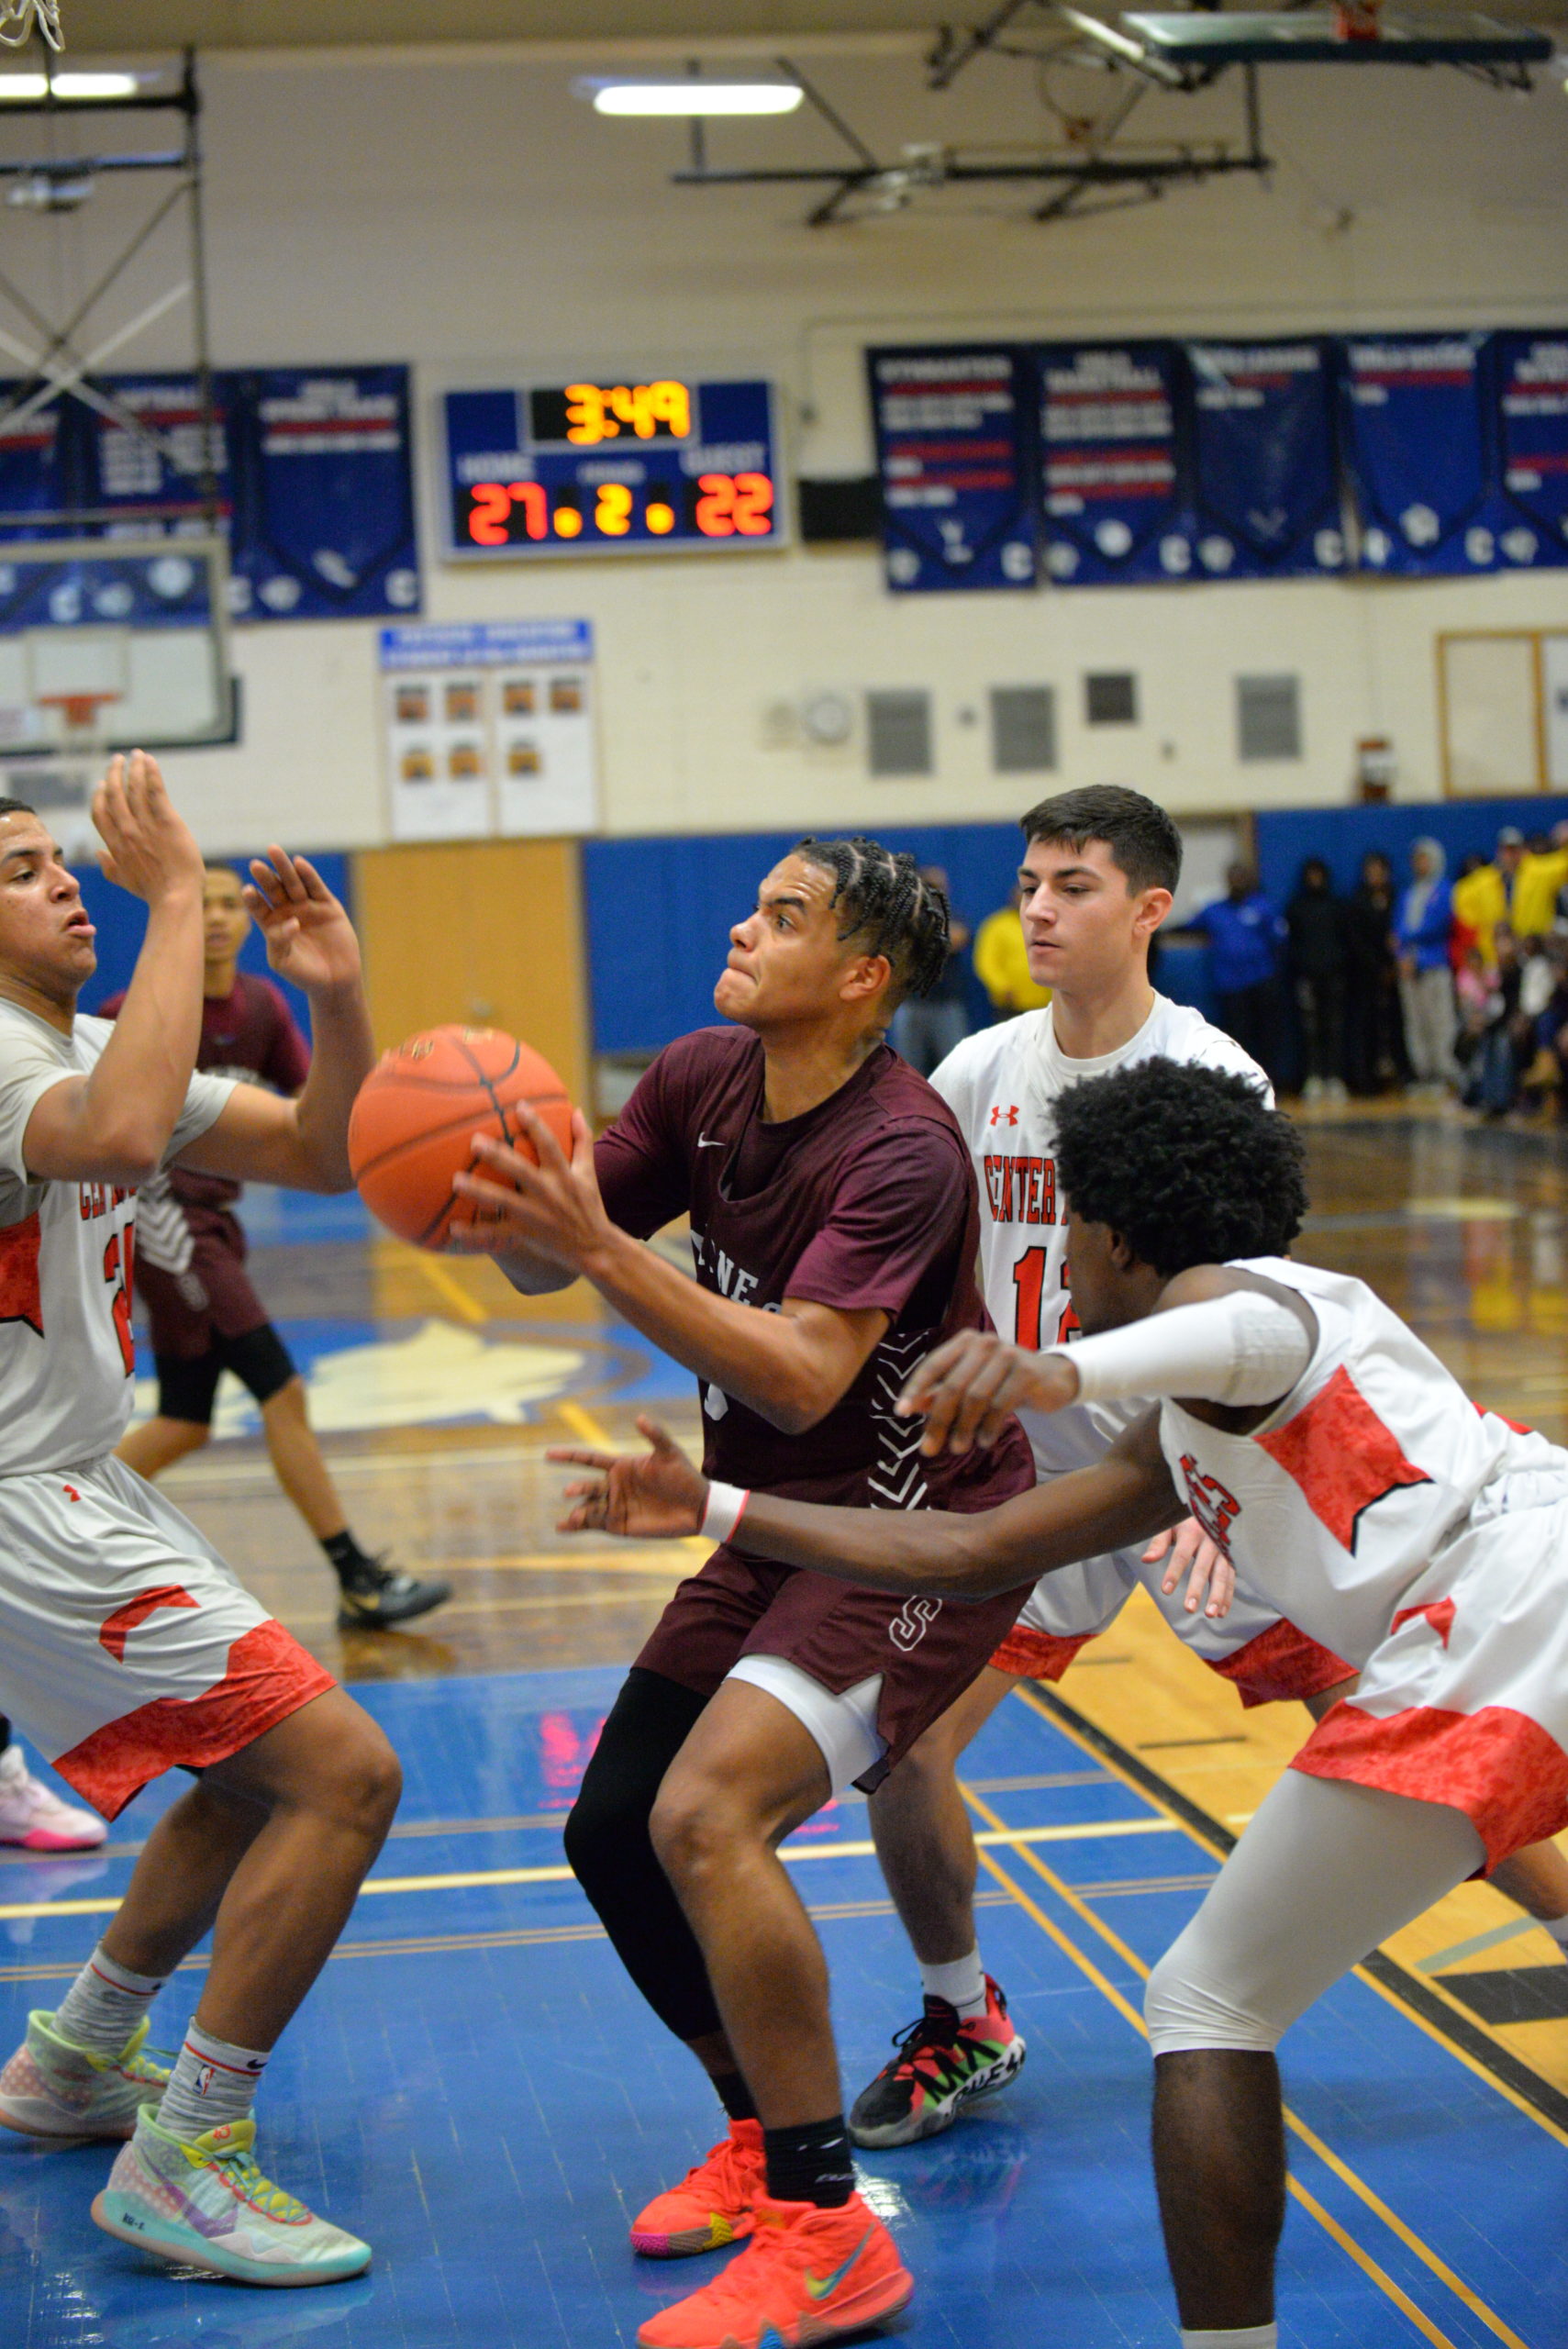 Southampton sophomore LeBron Napier is triple-teamed in the paint.